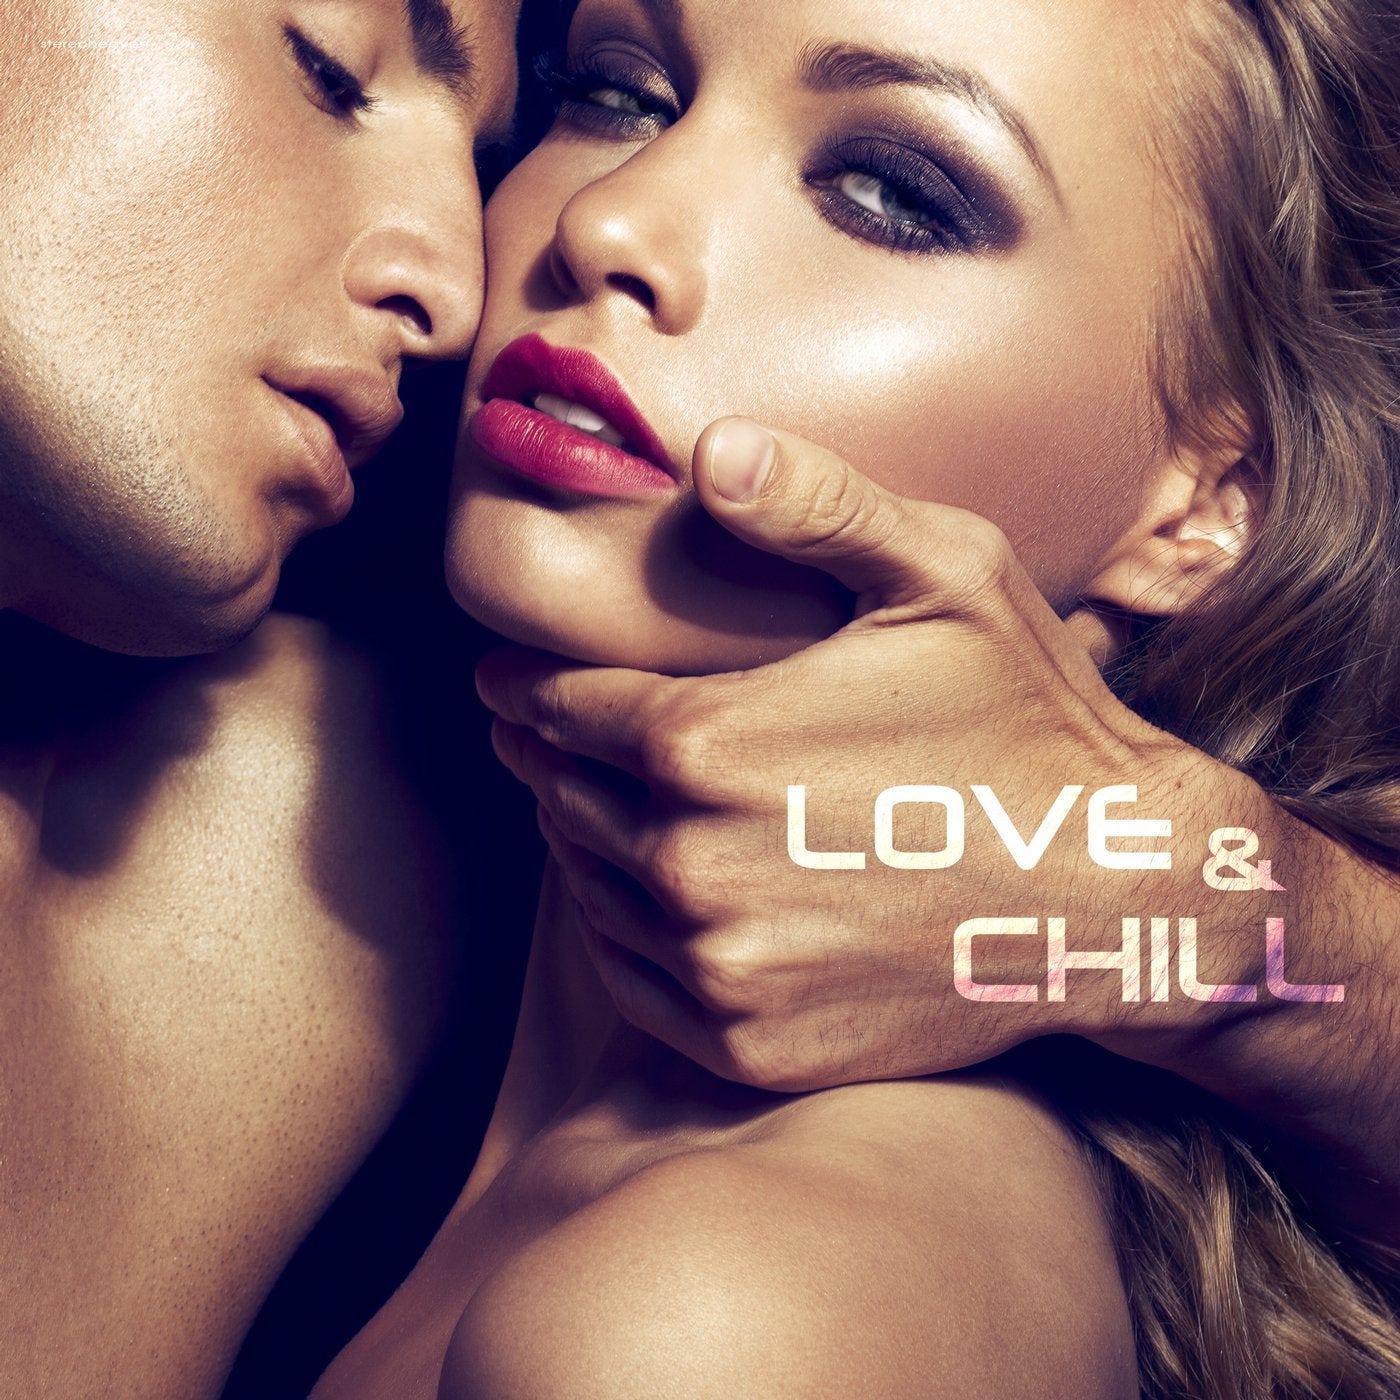 Chilled love. Lounge stories - Luxury Chill & Lounge Tunes, Vol. 2. Lovely Top Chill. Luxury stories 20 Pack. X Kiss Chill.